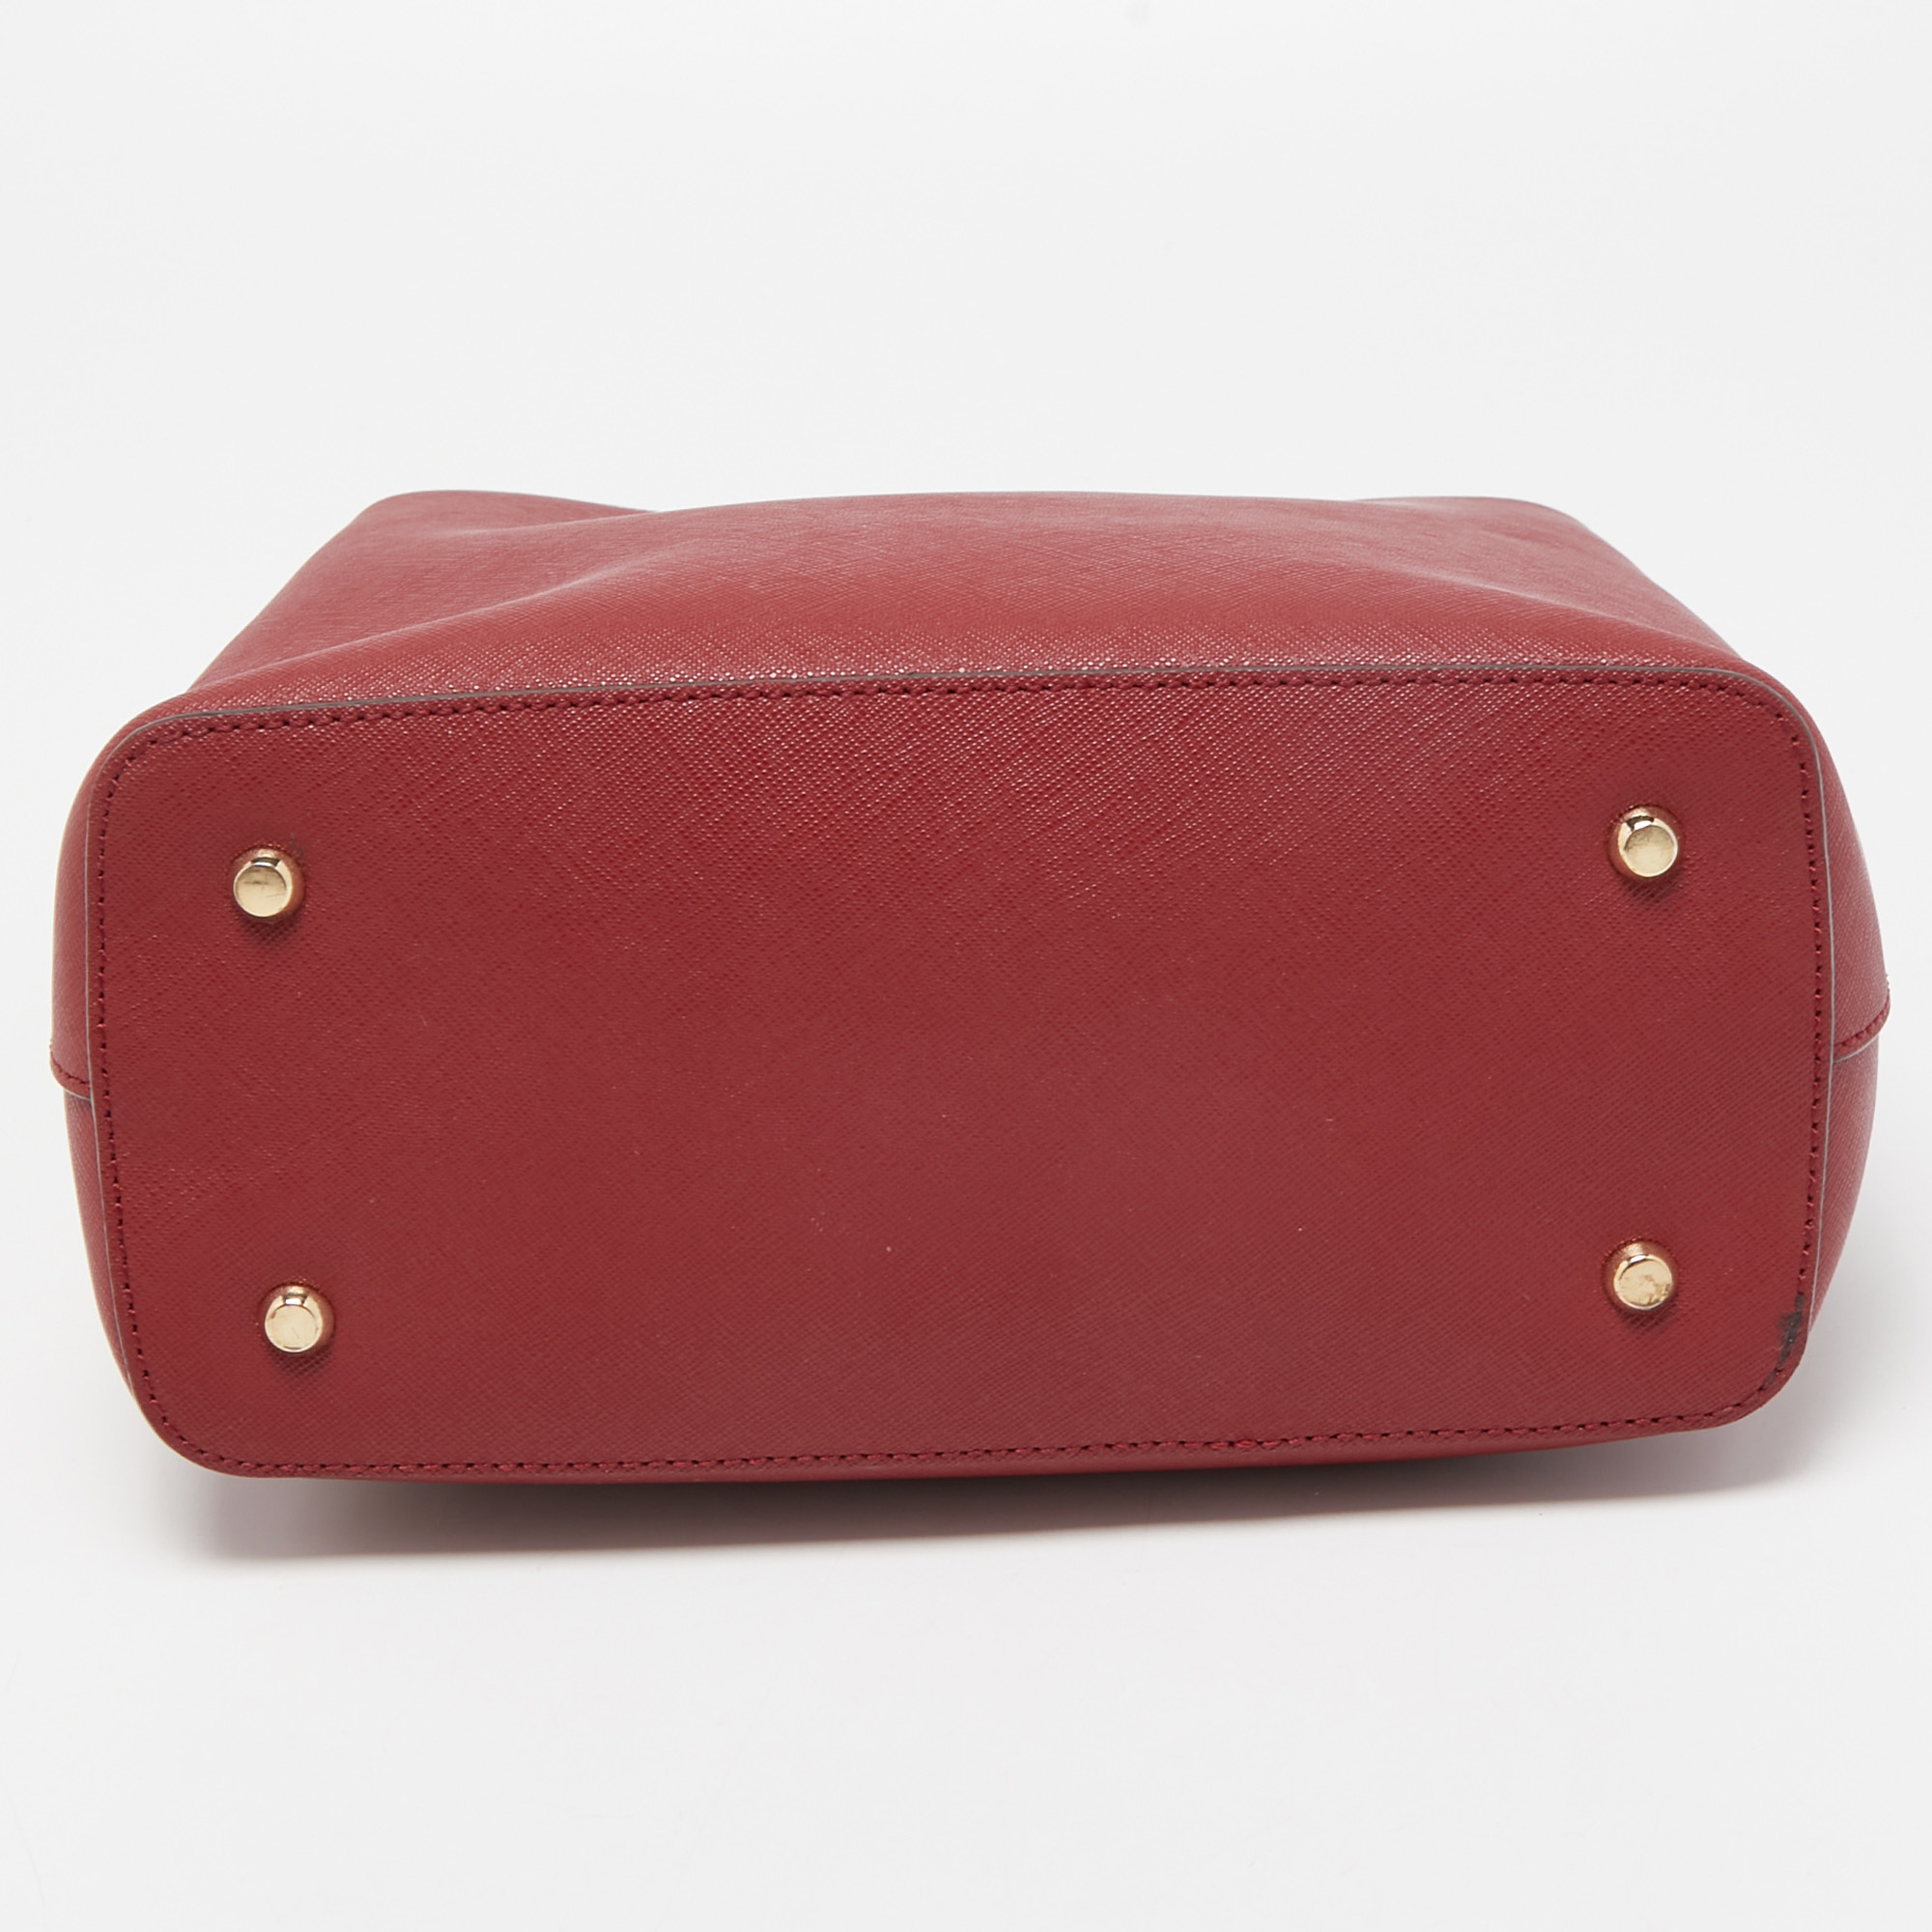 Dkny Red Leather Bryant Park Bag